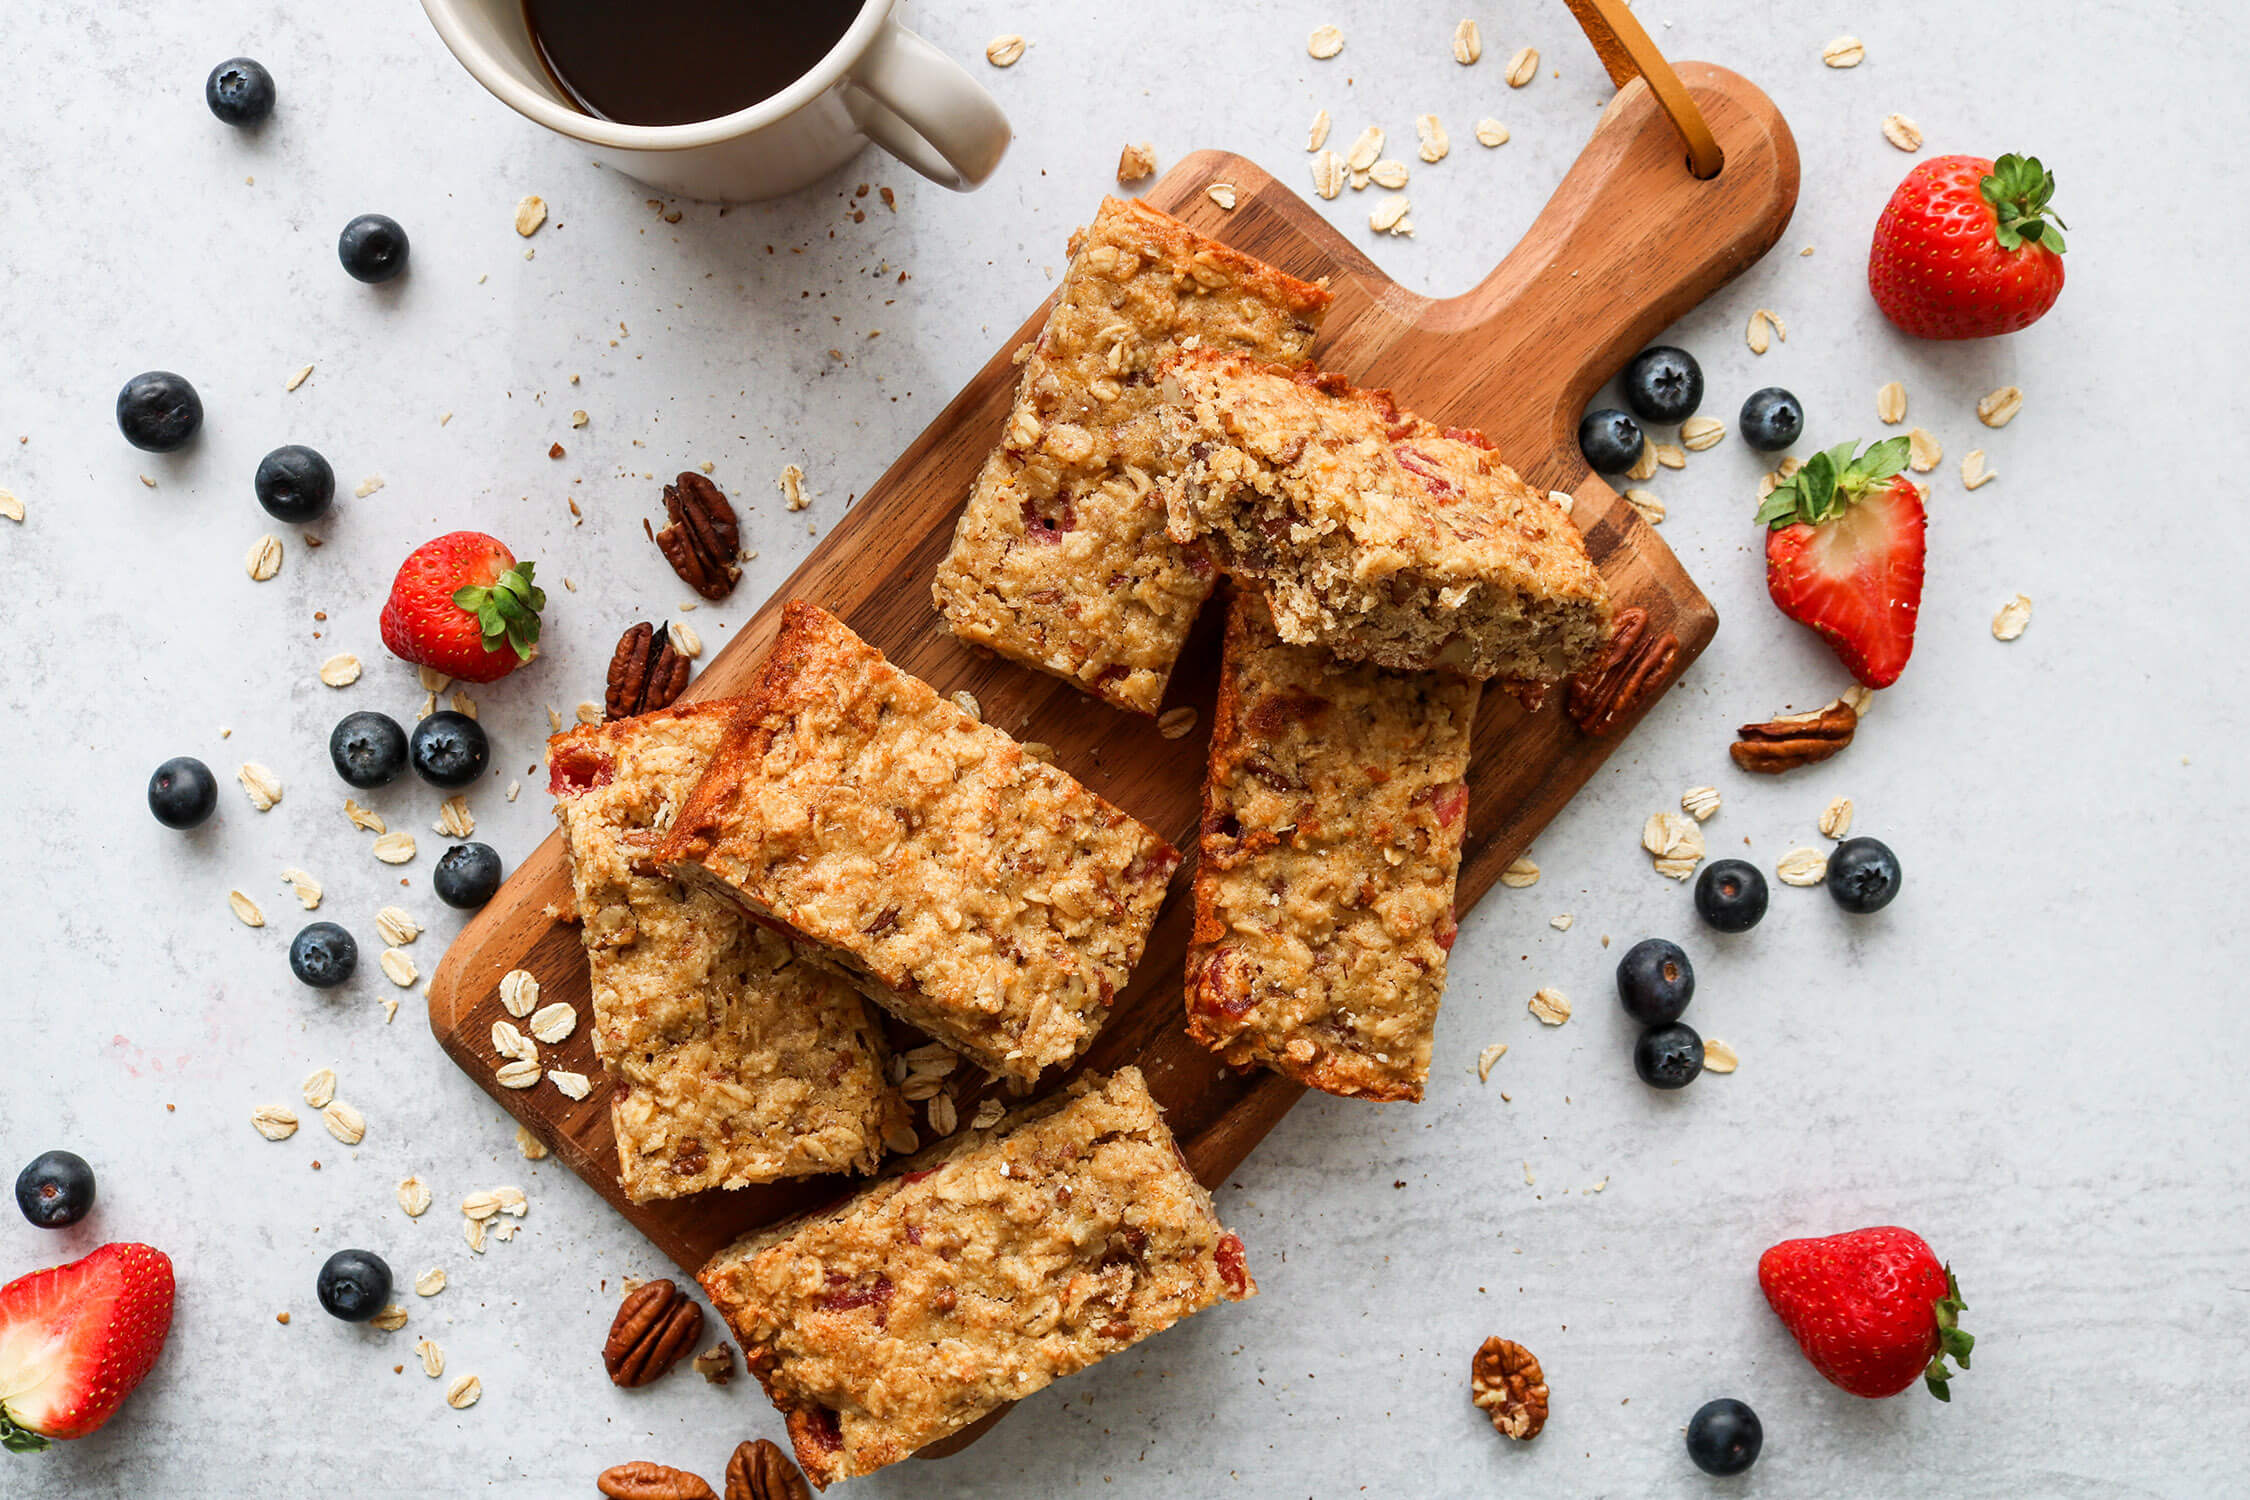 Mixed Berry Oatmeal Breakfast Bars made with Red Vines Made Simple Licorice